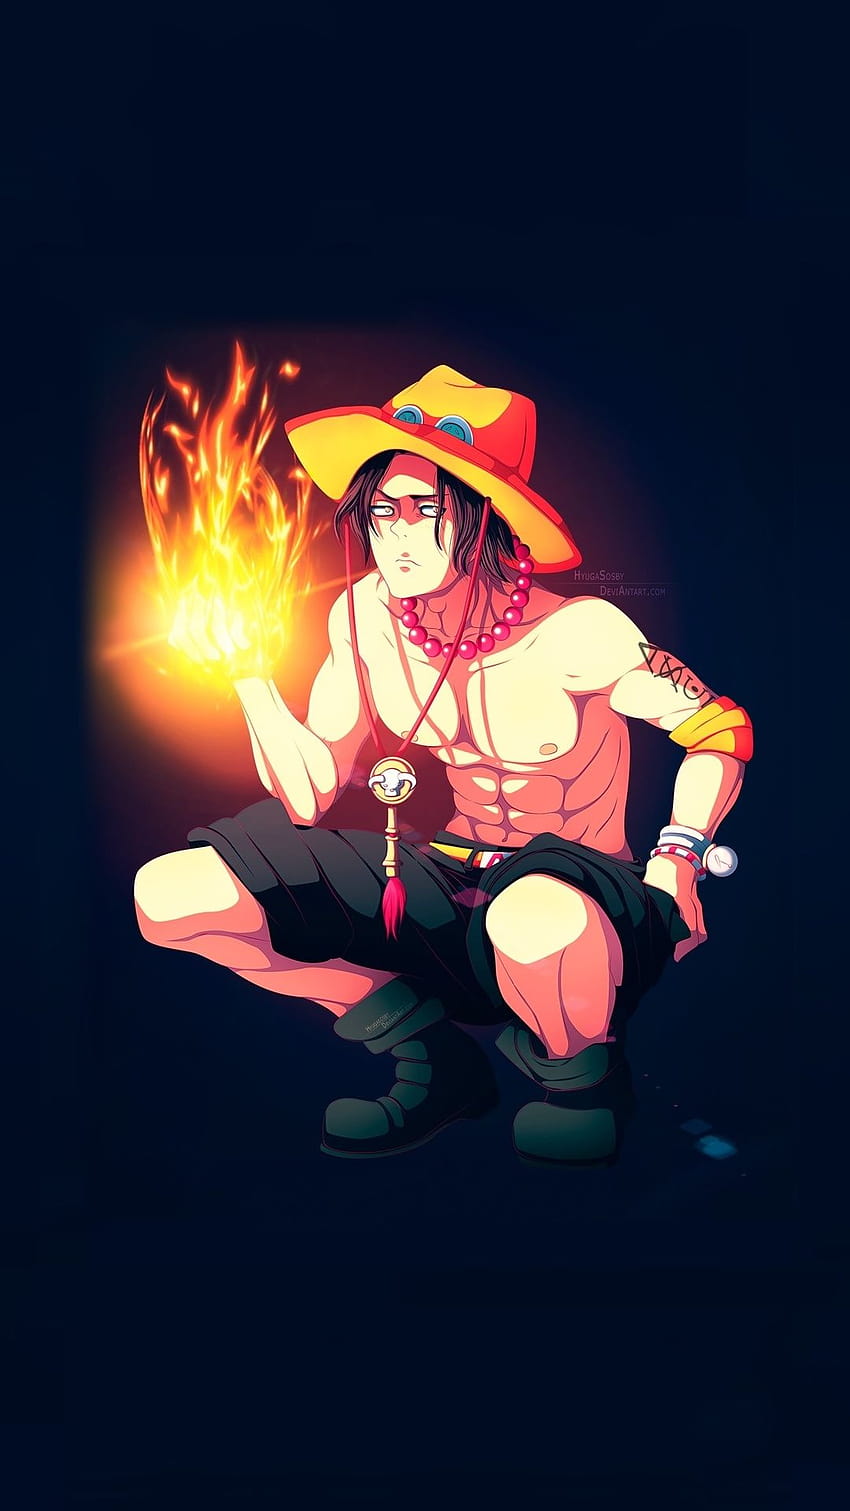 Portgas D. Ace, one Piece, minimal, artwork, 1080x1920, android one piece ace HD phone wallpaper